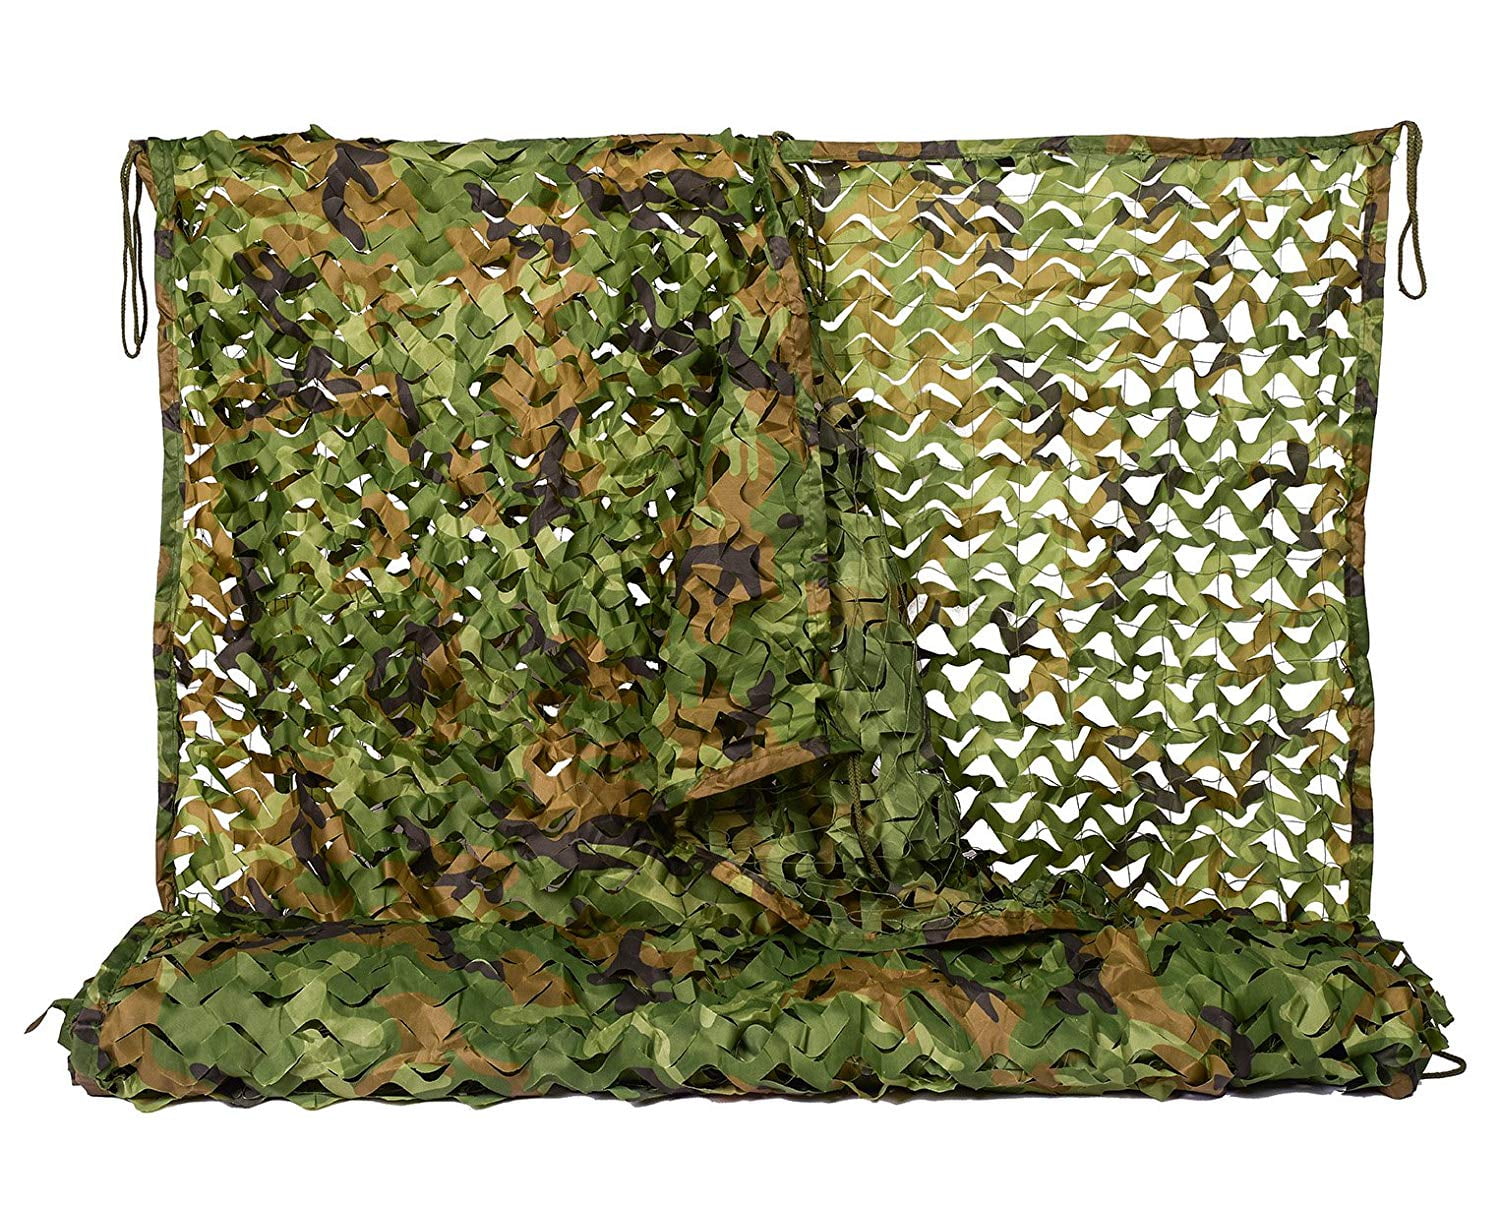 Camo Net Camouflage Netting Hunting Shooting Hide Army Woodland Truck shelter 